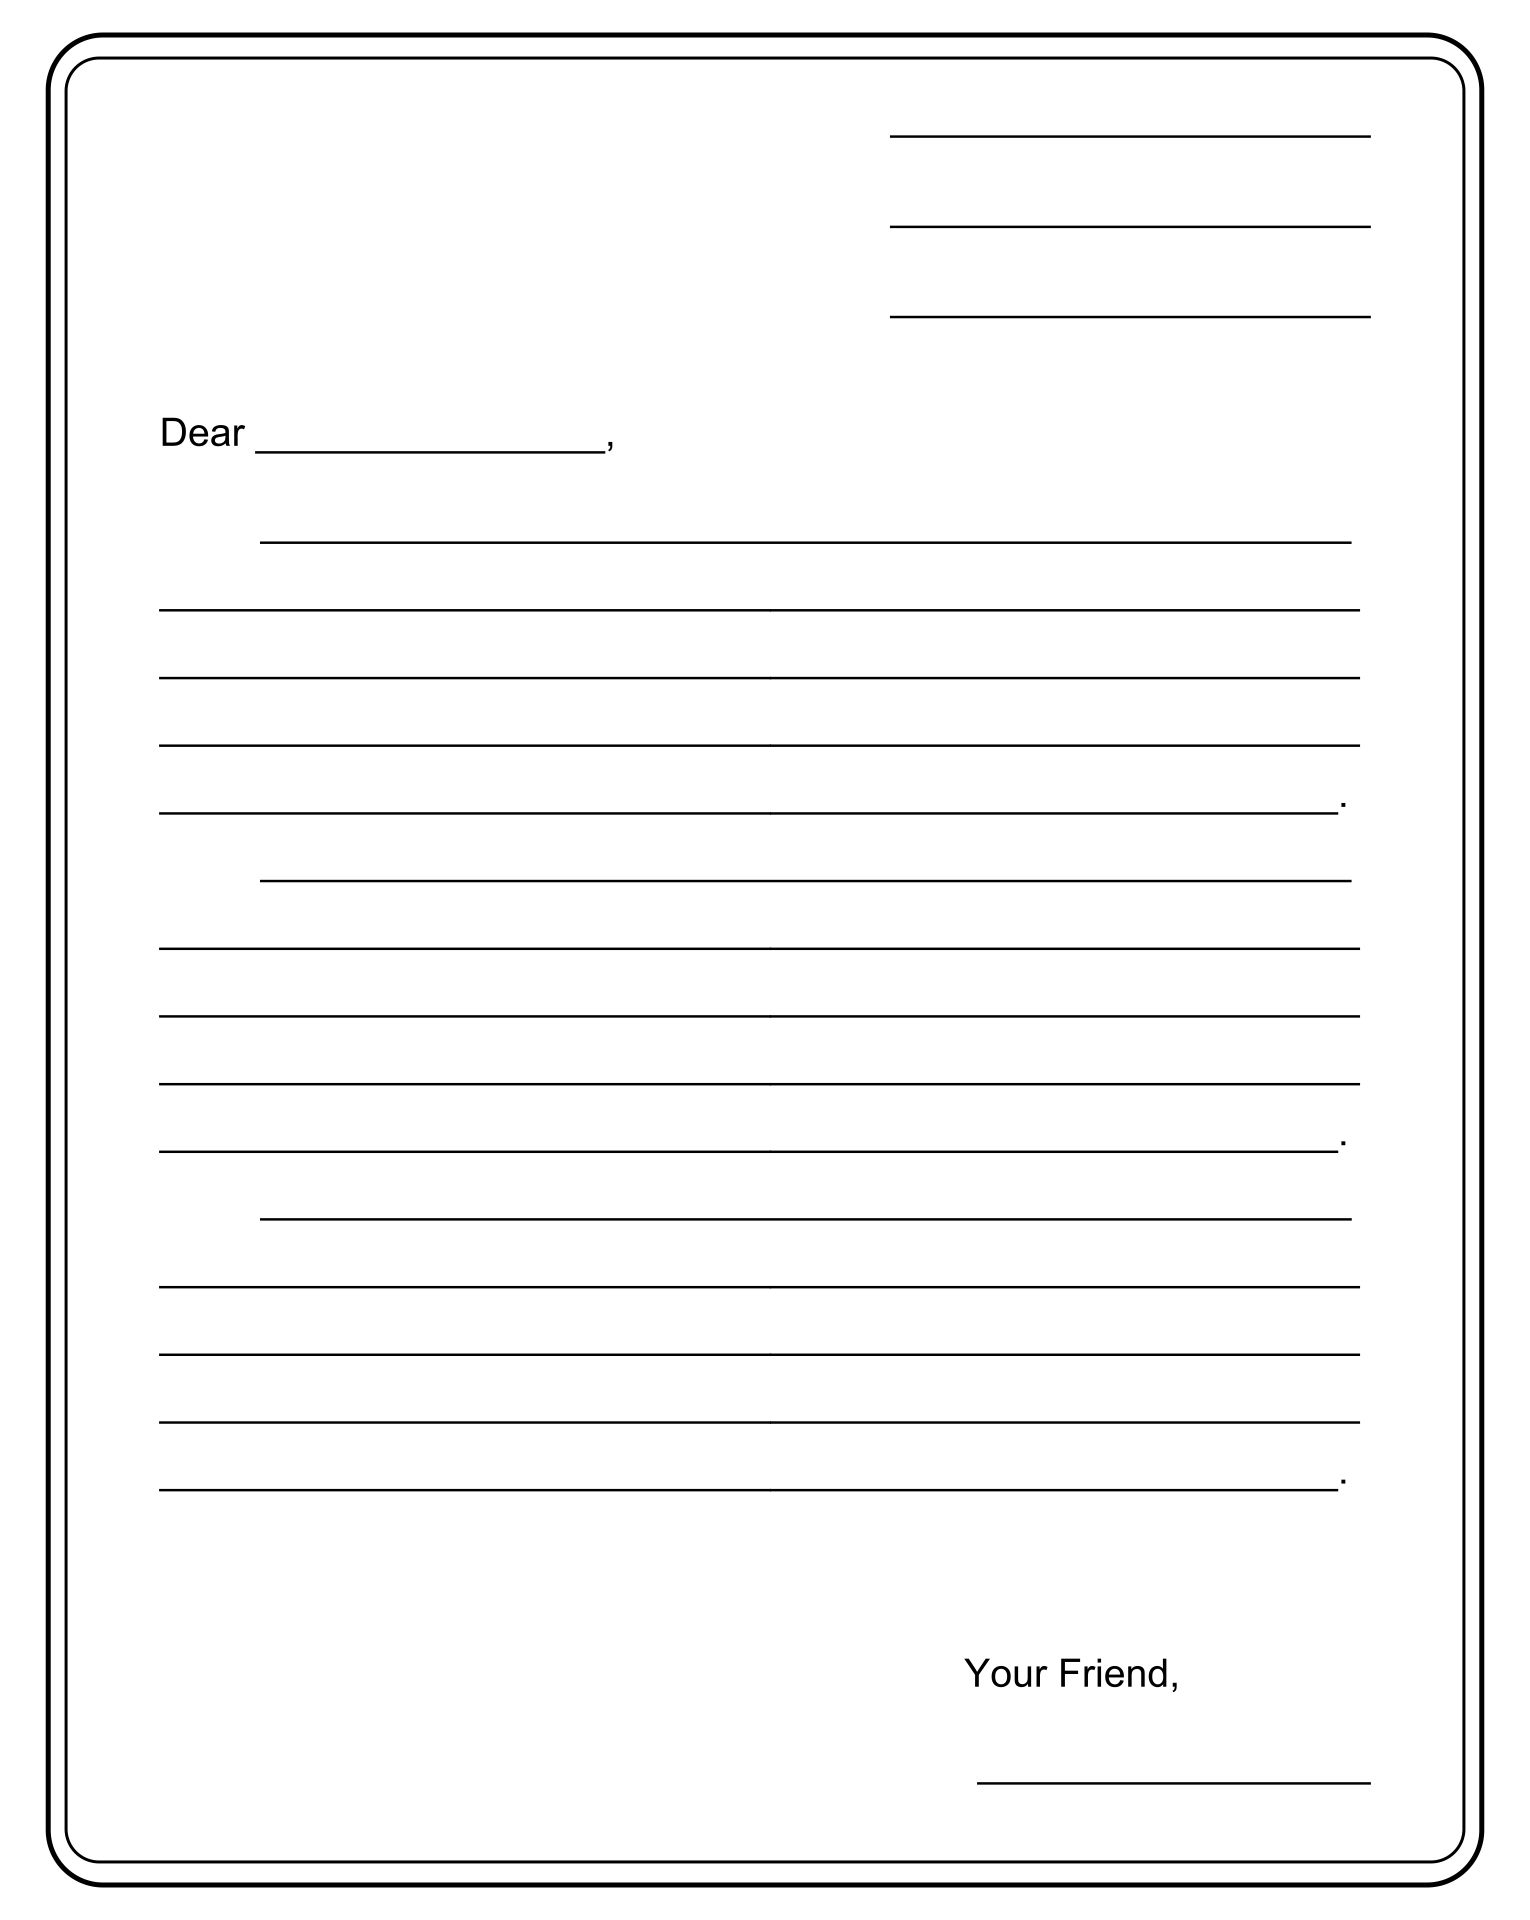 8 Best Images of Printable Blank Letter Template - Letter-Writing ...